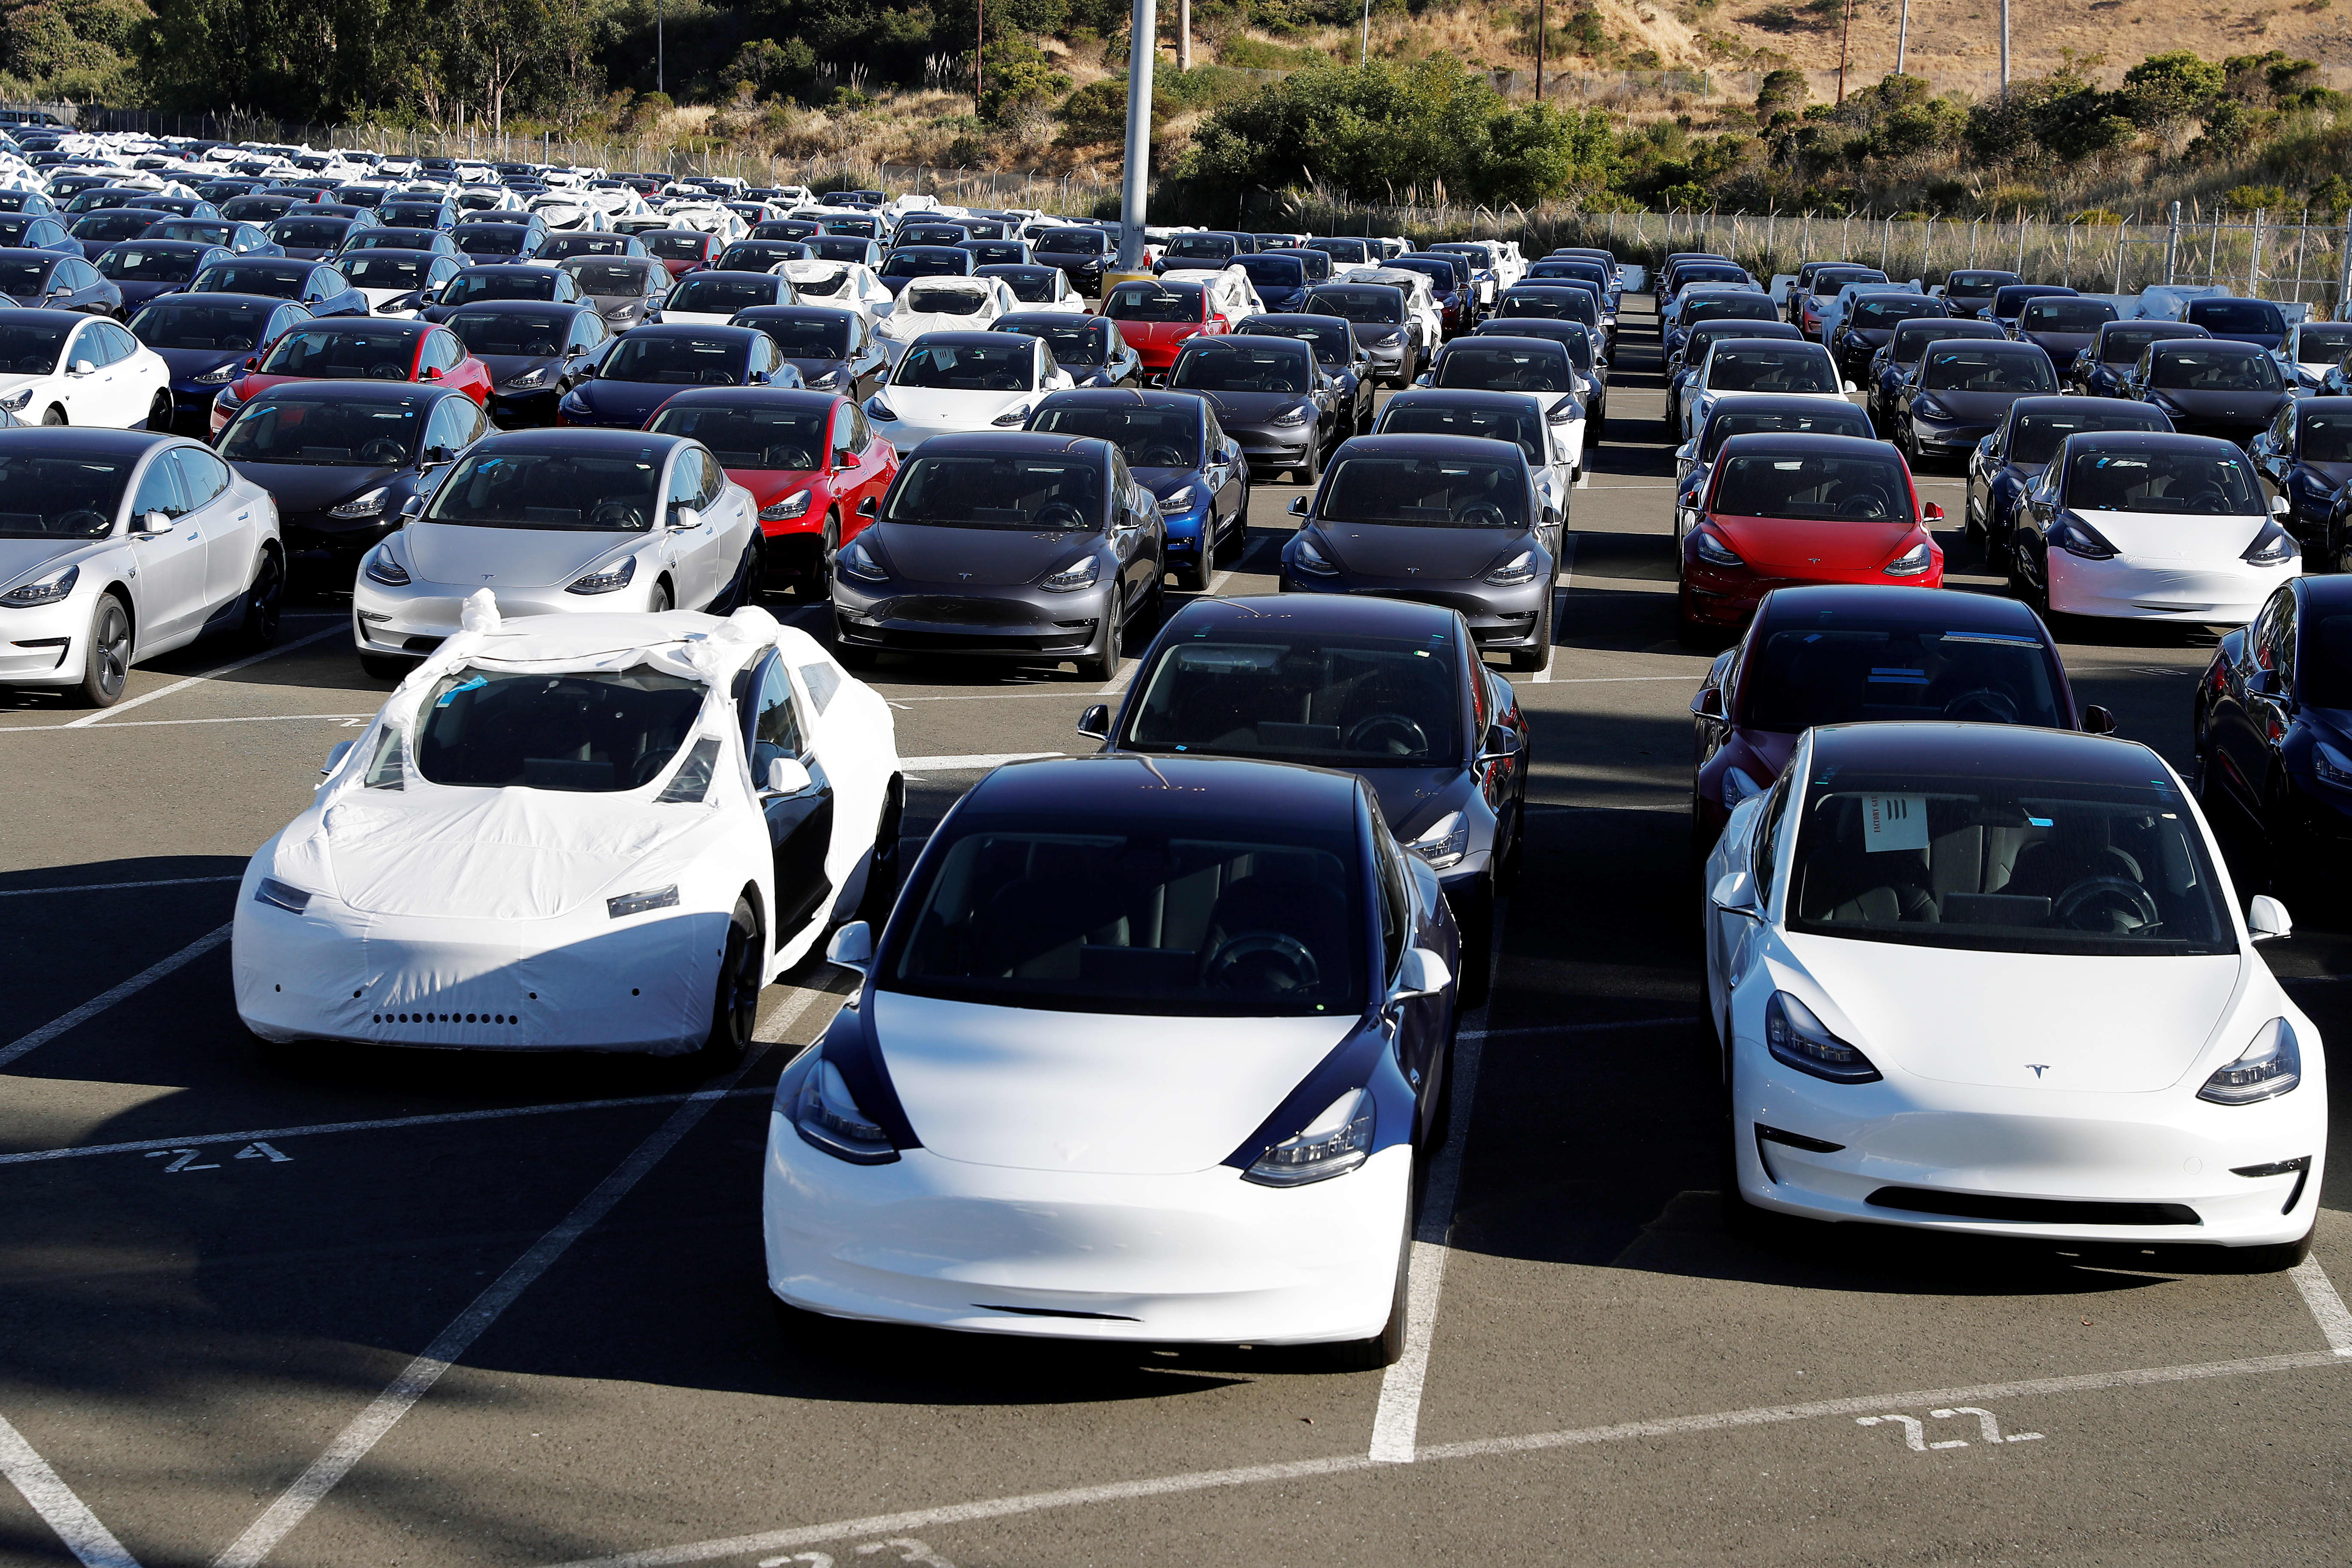 Tesla delivered 241,300 vehicles in the third quarter, topping expectations